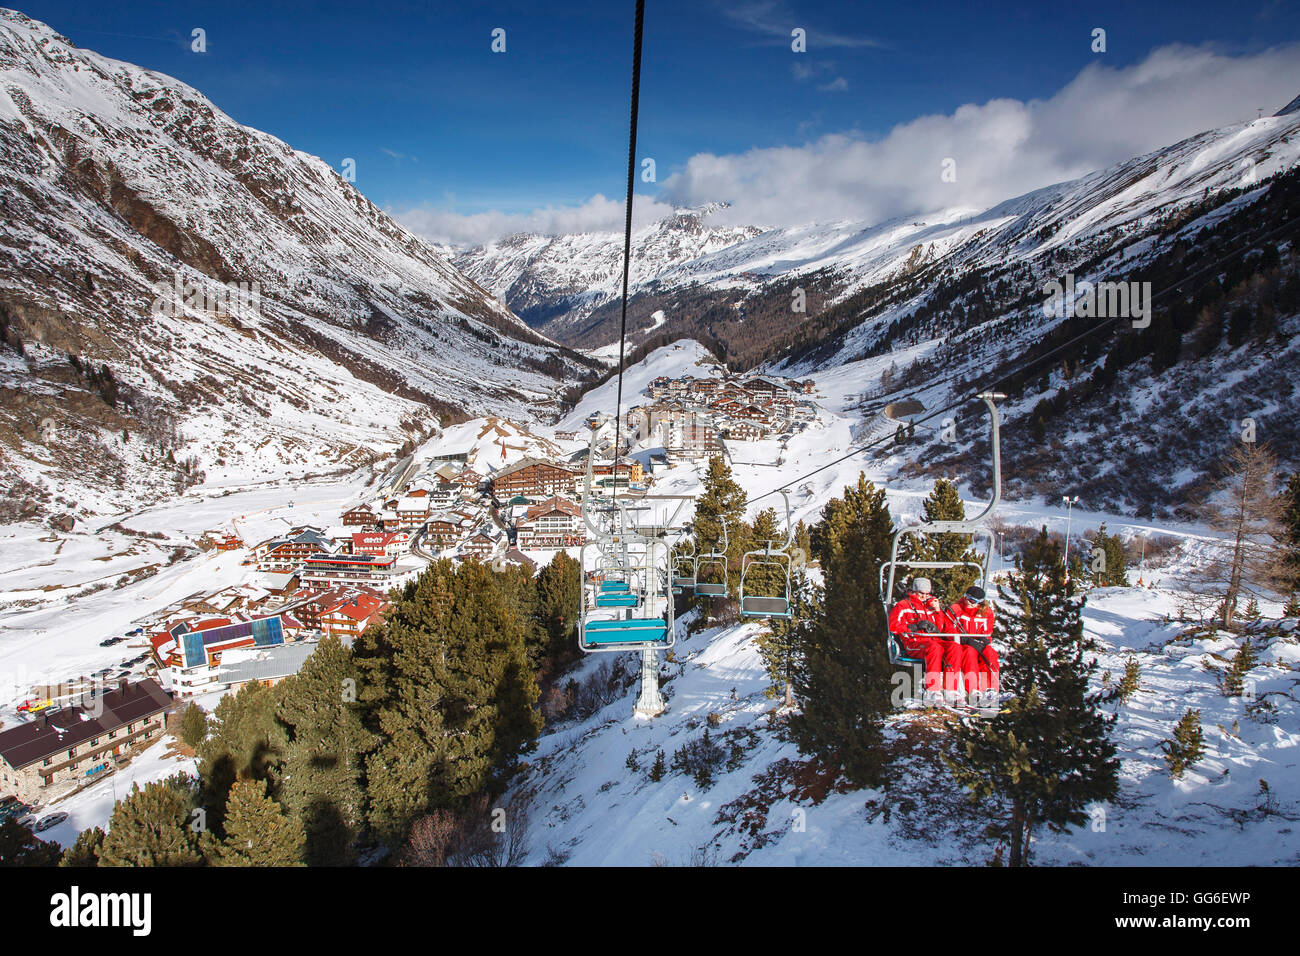 The village of Obergurgl, Otztal valley as skiers ascend the mountain on chairlifts, Tyrol, Austrian Alps, Austria Stock Photo